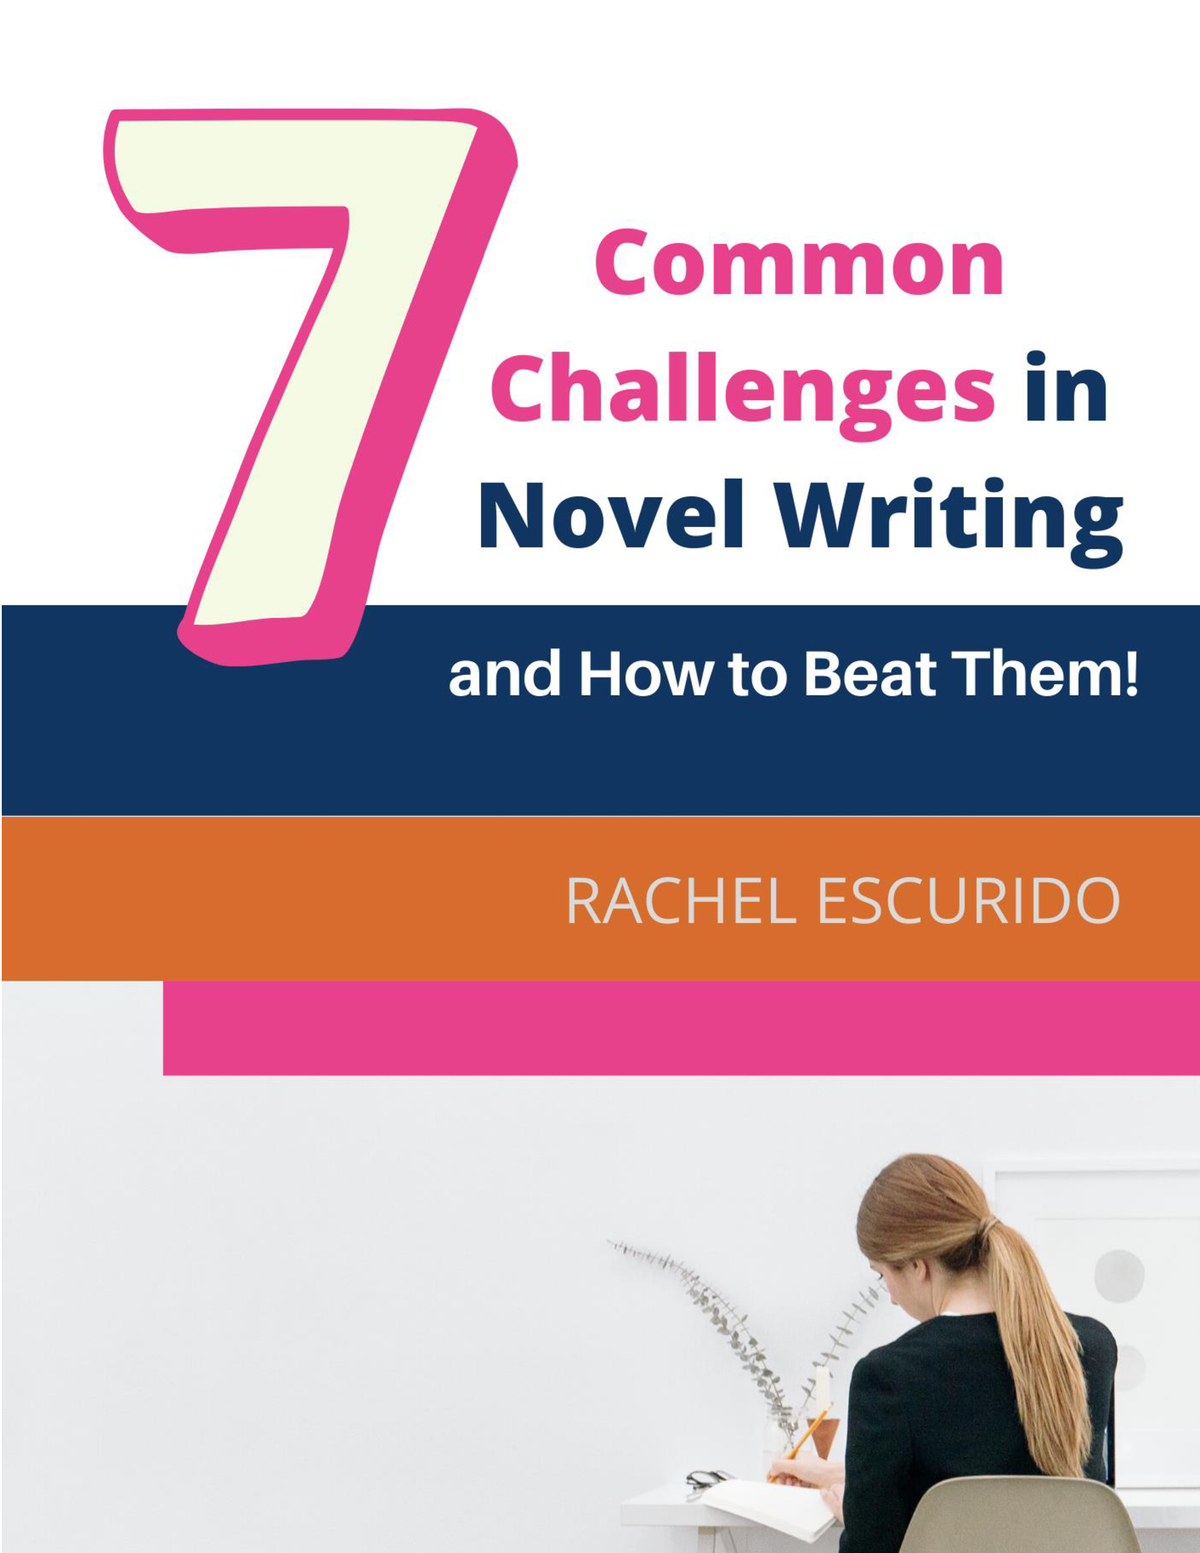 7-common-challenges-in-novel-writing-2-dear-reader-do-you-want-to